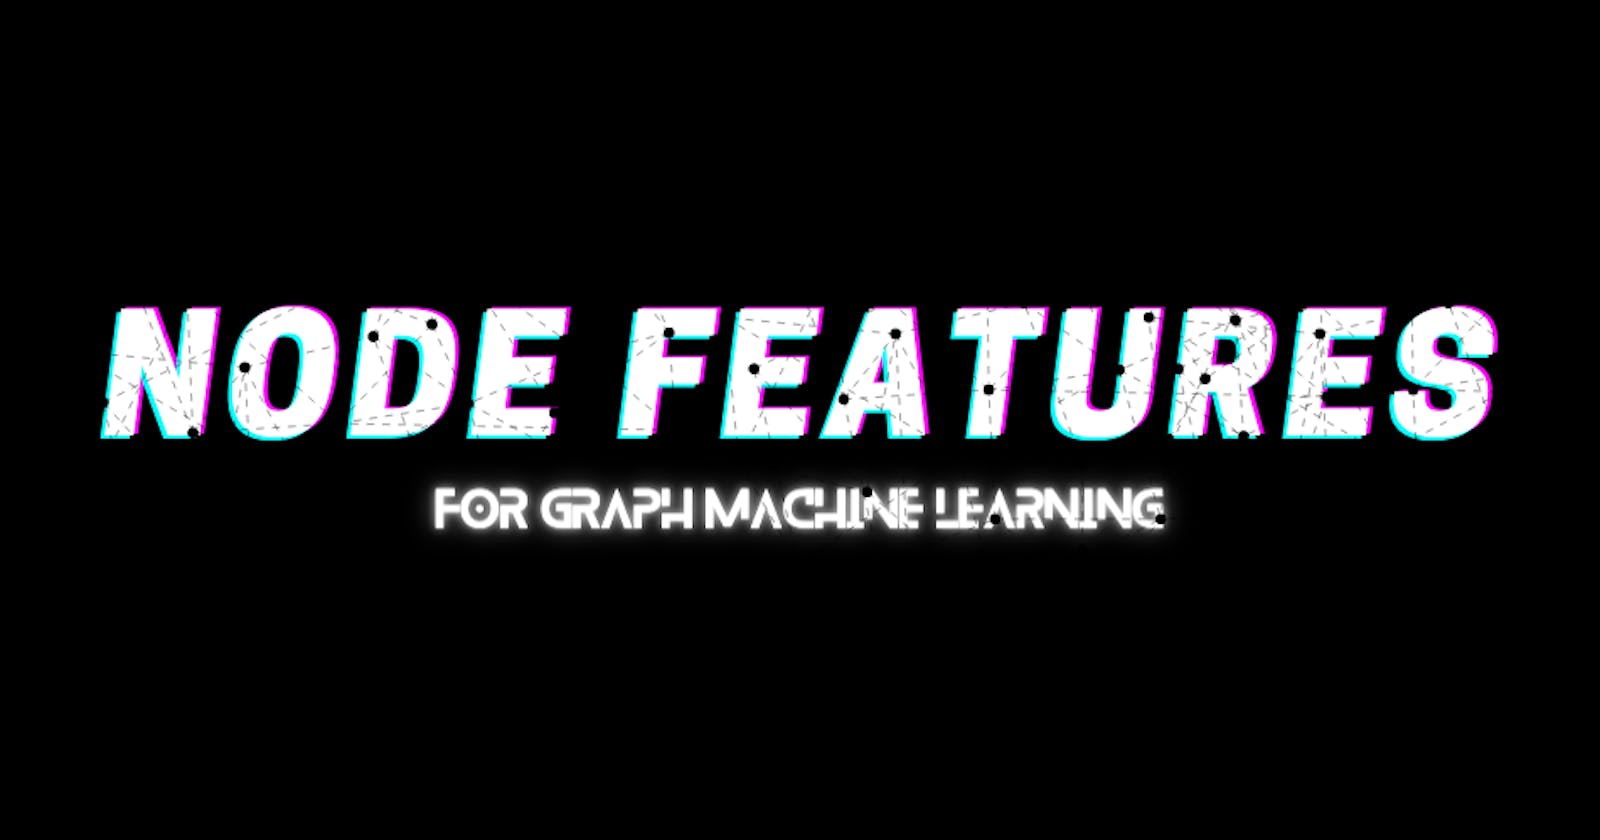 Node Features for Graph Machine Learning